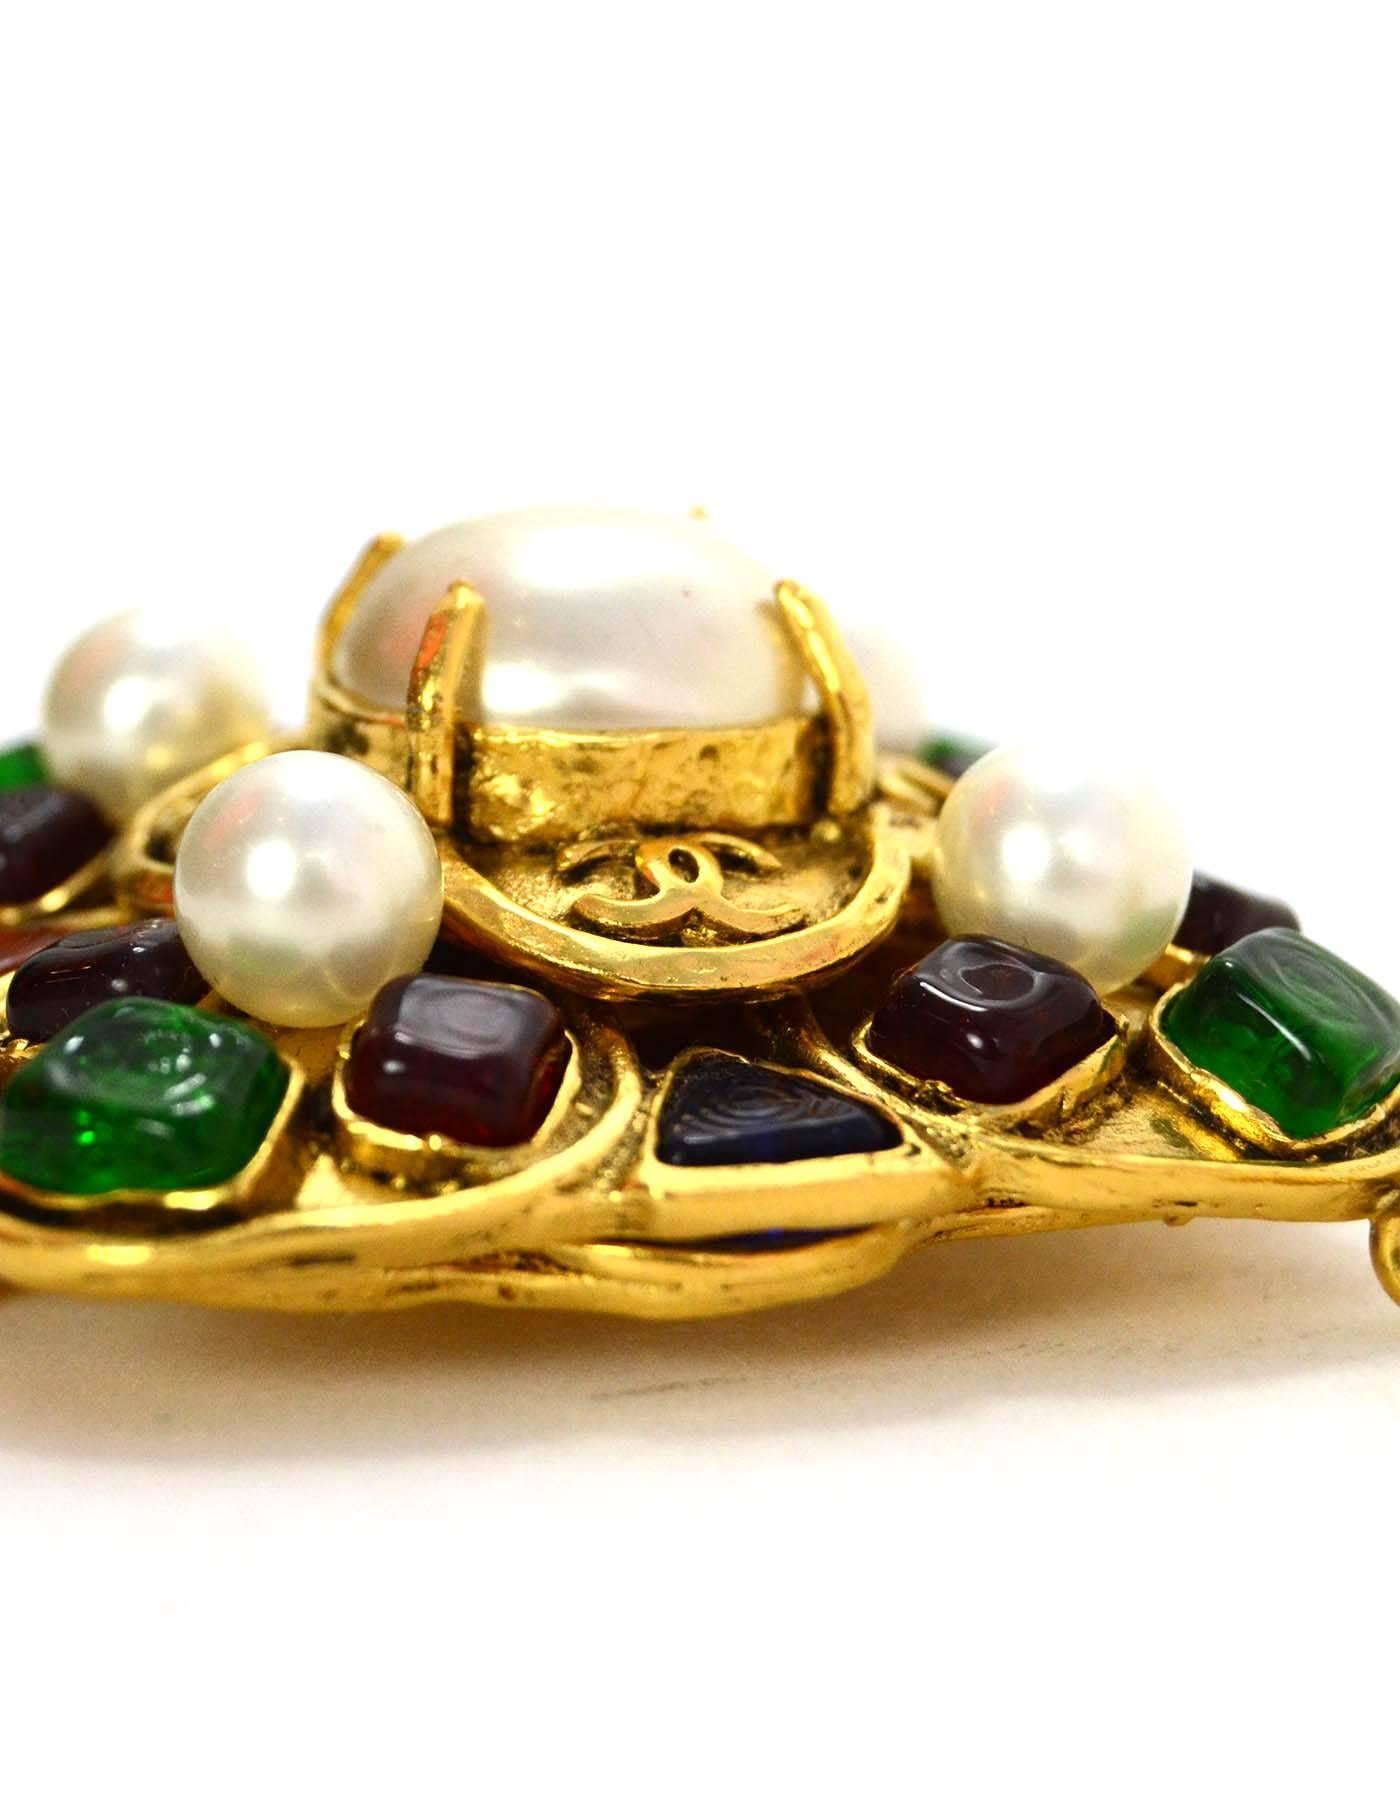 Chanel Vintage '94 Multi-Color Gripoix & Pearl Drop Brooch
Features pendant with green, red, blue and amber gripoix with faux pearl accents. CC detailing around center pearl

-Made In: France
-Year of Production: 1994
-Color: Goldtone, red,